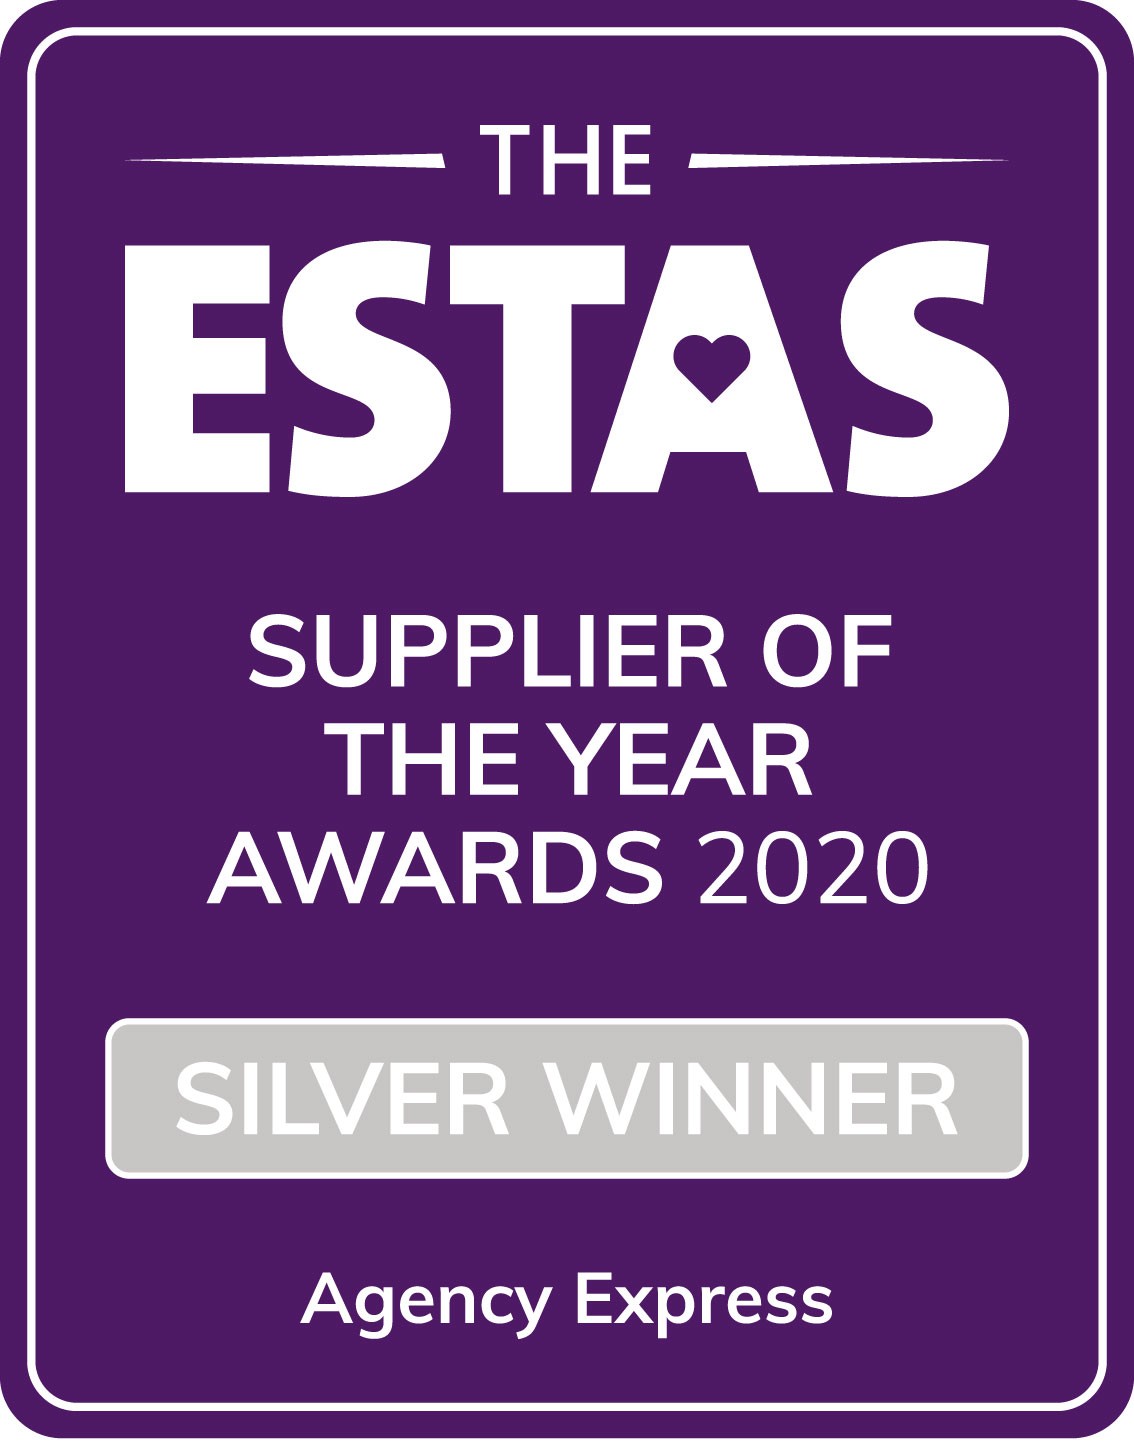 Agency Express remain in the UK’s top three suppliers to estate agents for the 7th consecutive year